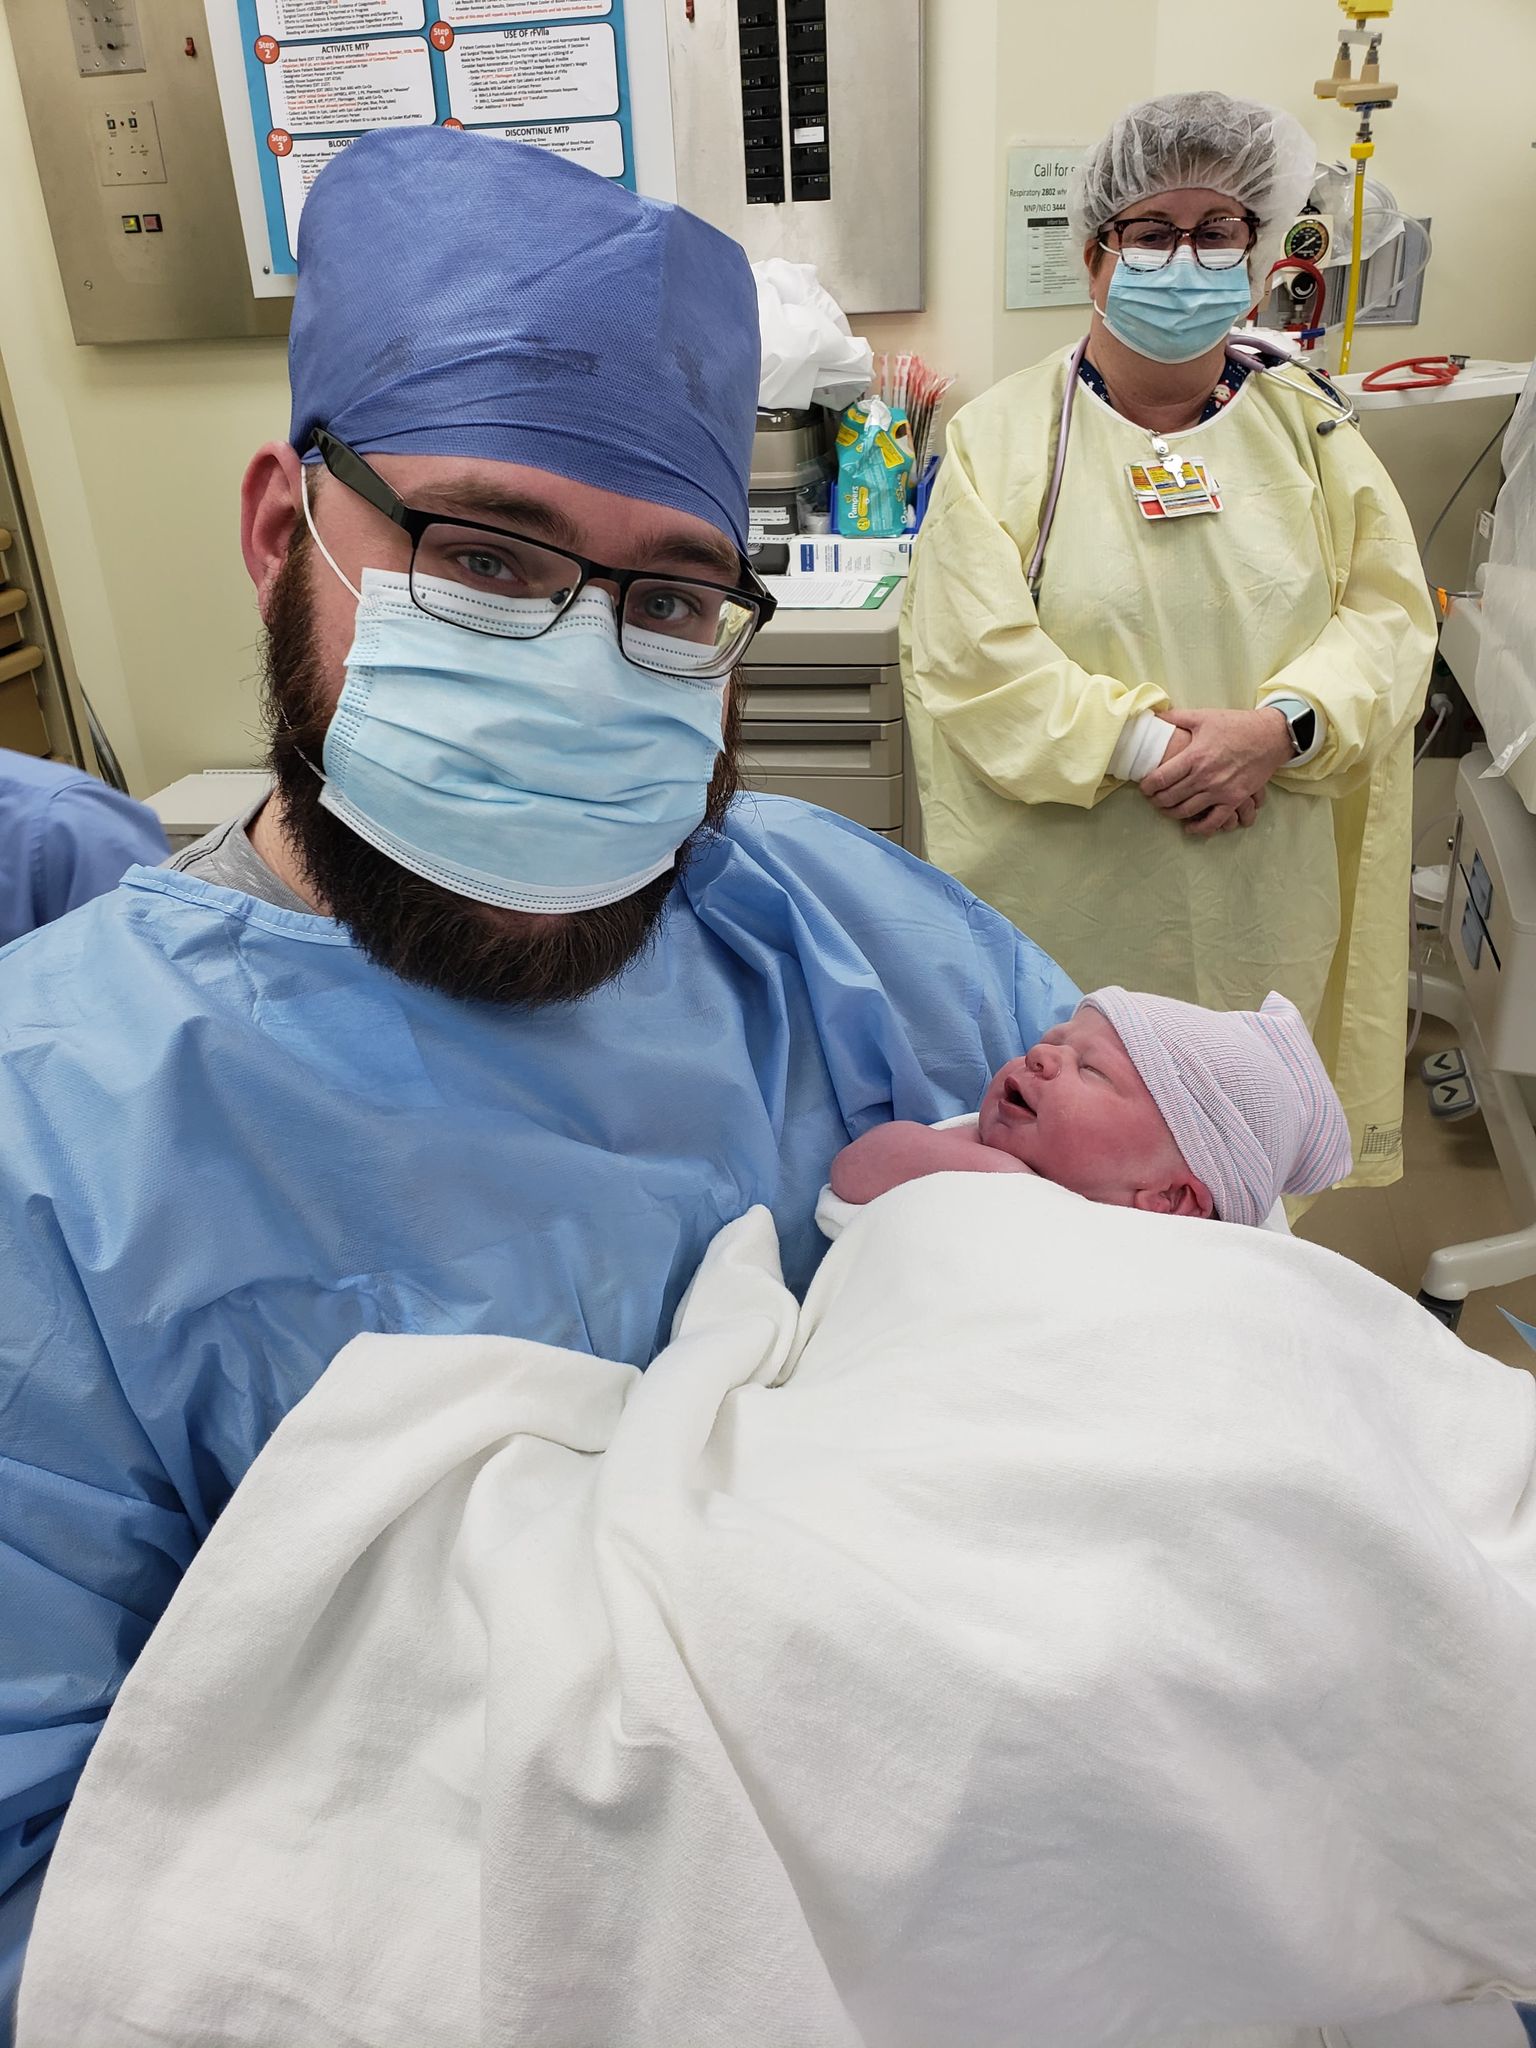 Man in blue surgical mask and scrubs holds newborn with doctor standing in background